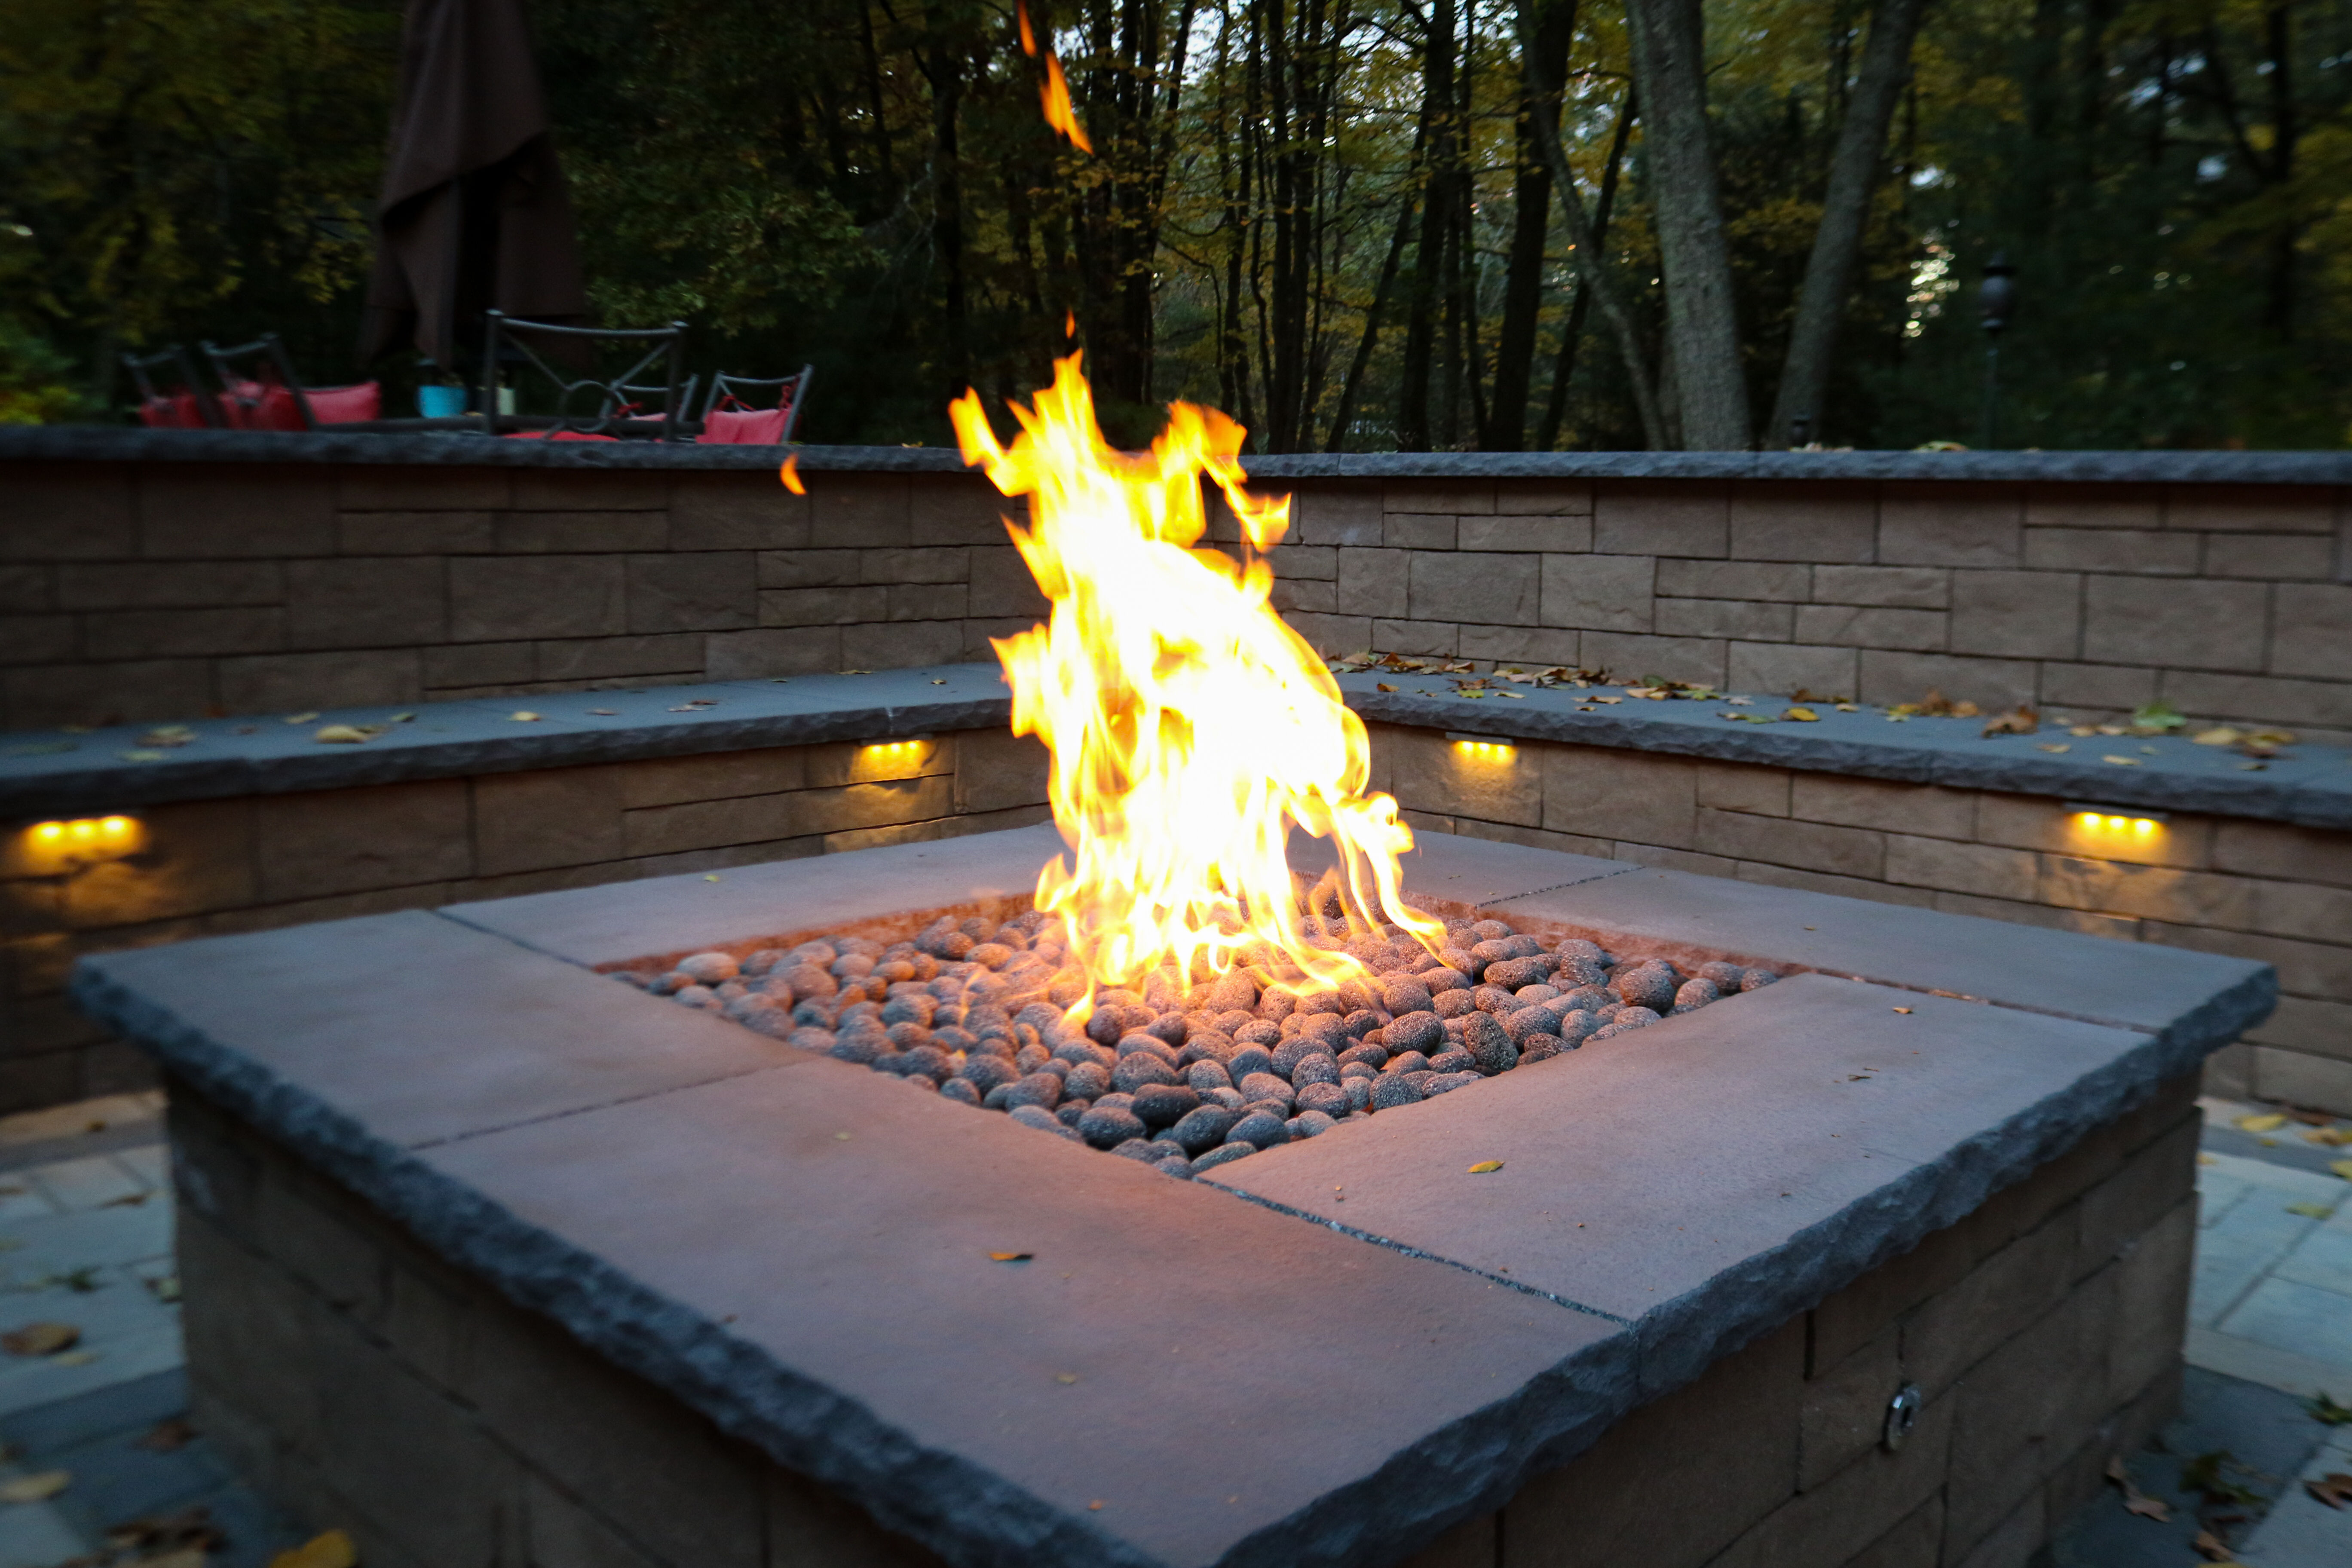 How To Build A Gas Fire Pit | Woodlanddirect.com